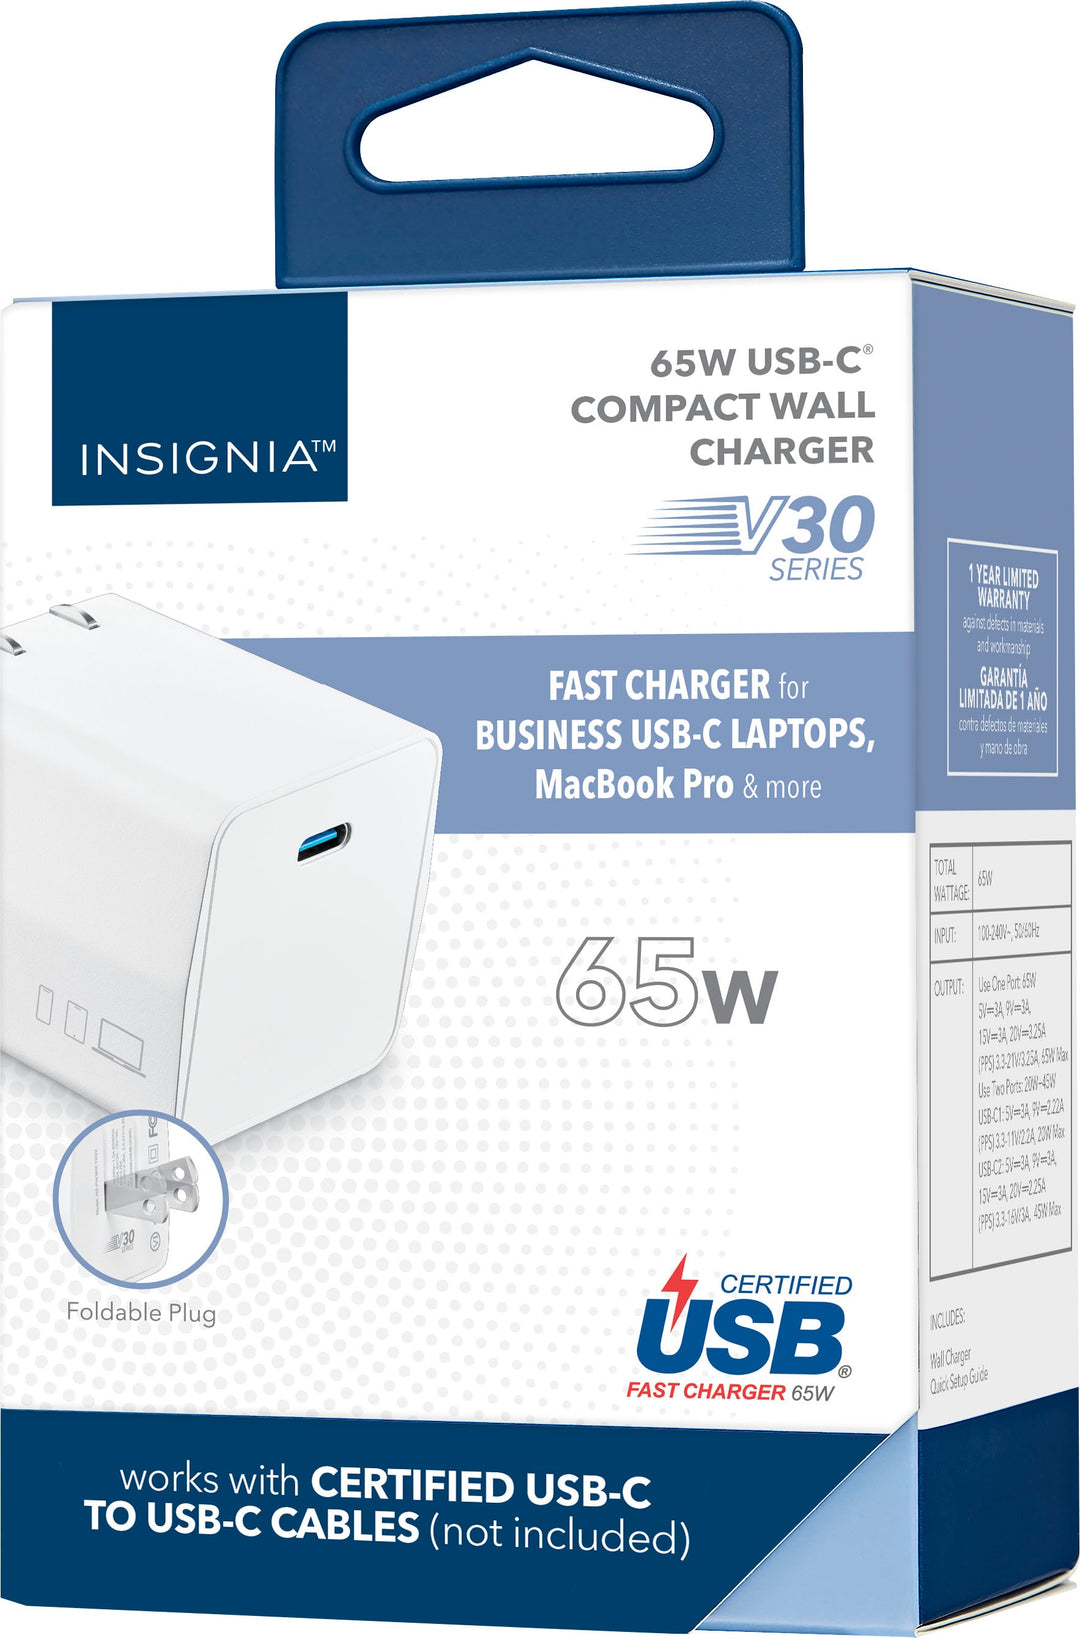 Insignia™ - 65W USB-C Compact Wall Charger for MacBook Pro, MacBook Air, and most USB-C Laptops - White_11